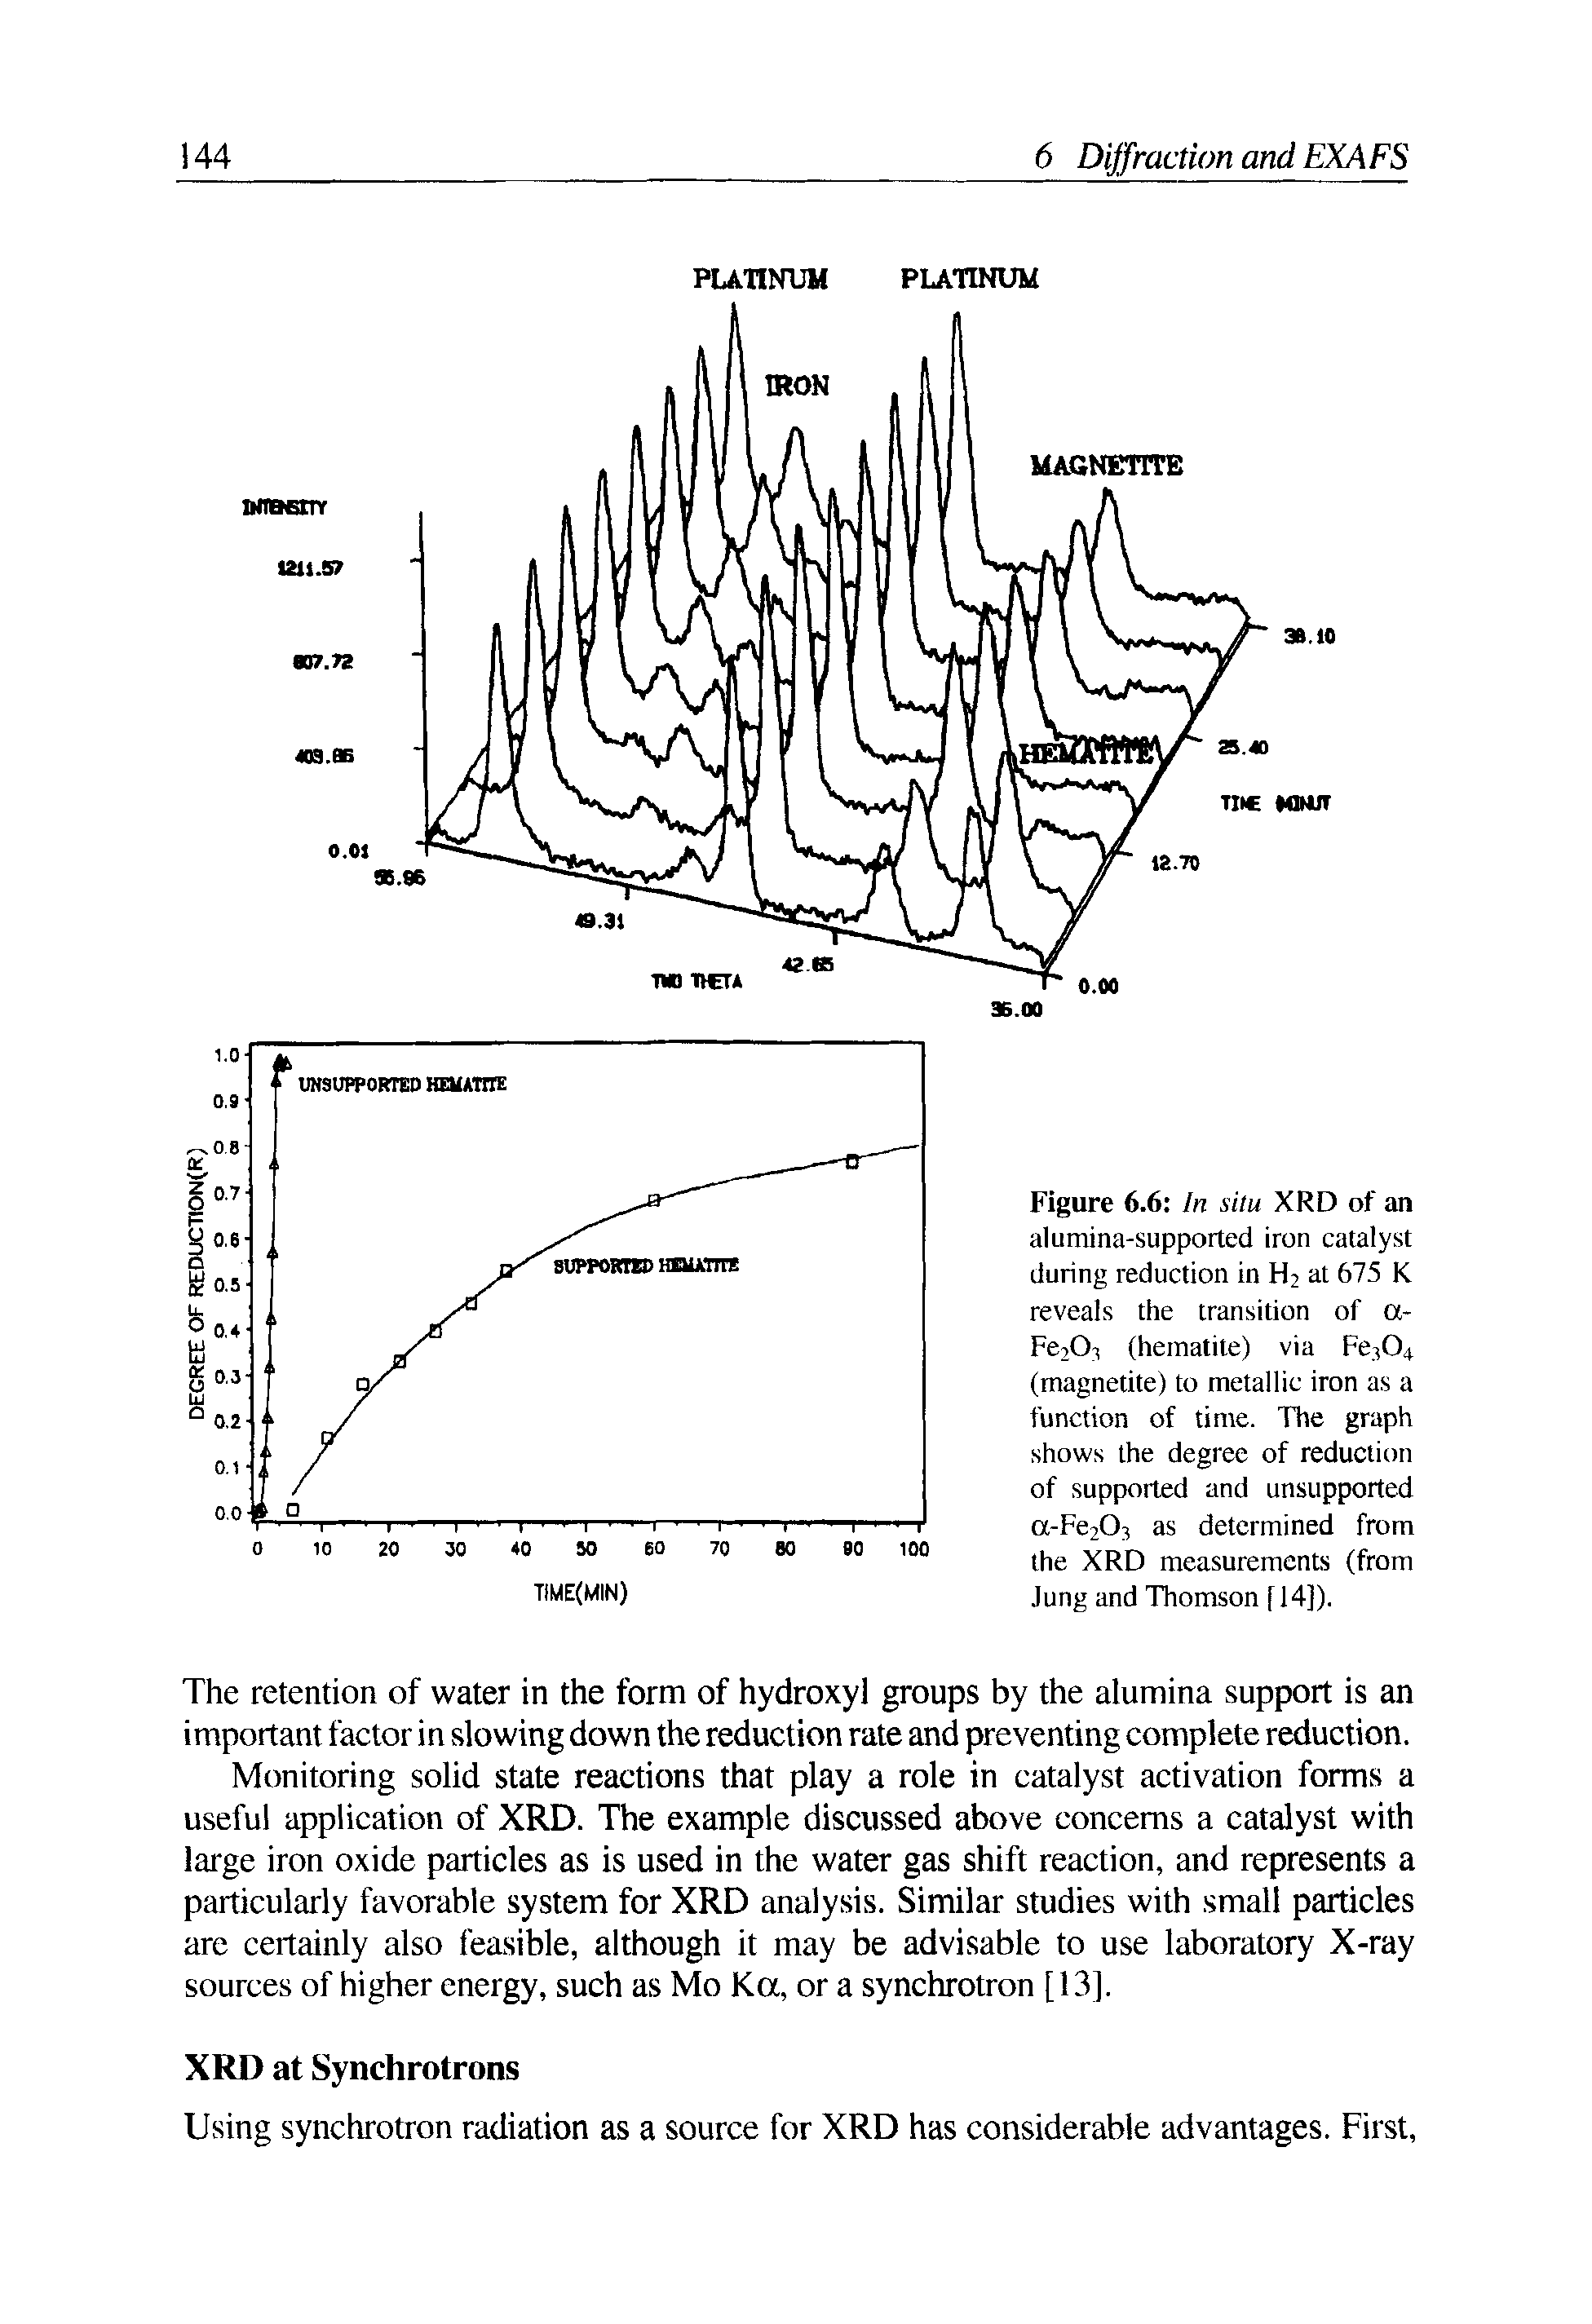 Figure 6.6 In situ XRD of an alumina-supported iron catalyst during reduction in H2 at 675 K reveals the transition of a-Fe202 (hematite) via Fe(04 (magnetite) to metallic iron as a function of time. The graph shows the degree of reduction of supported and unsupported oc-Fe203 as determined from the XRD measurements (from Jung and Thomson f 14]).